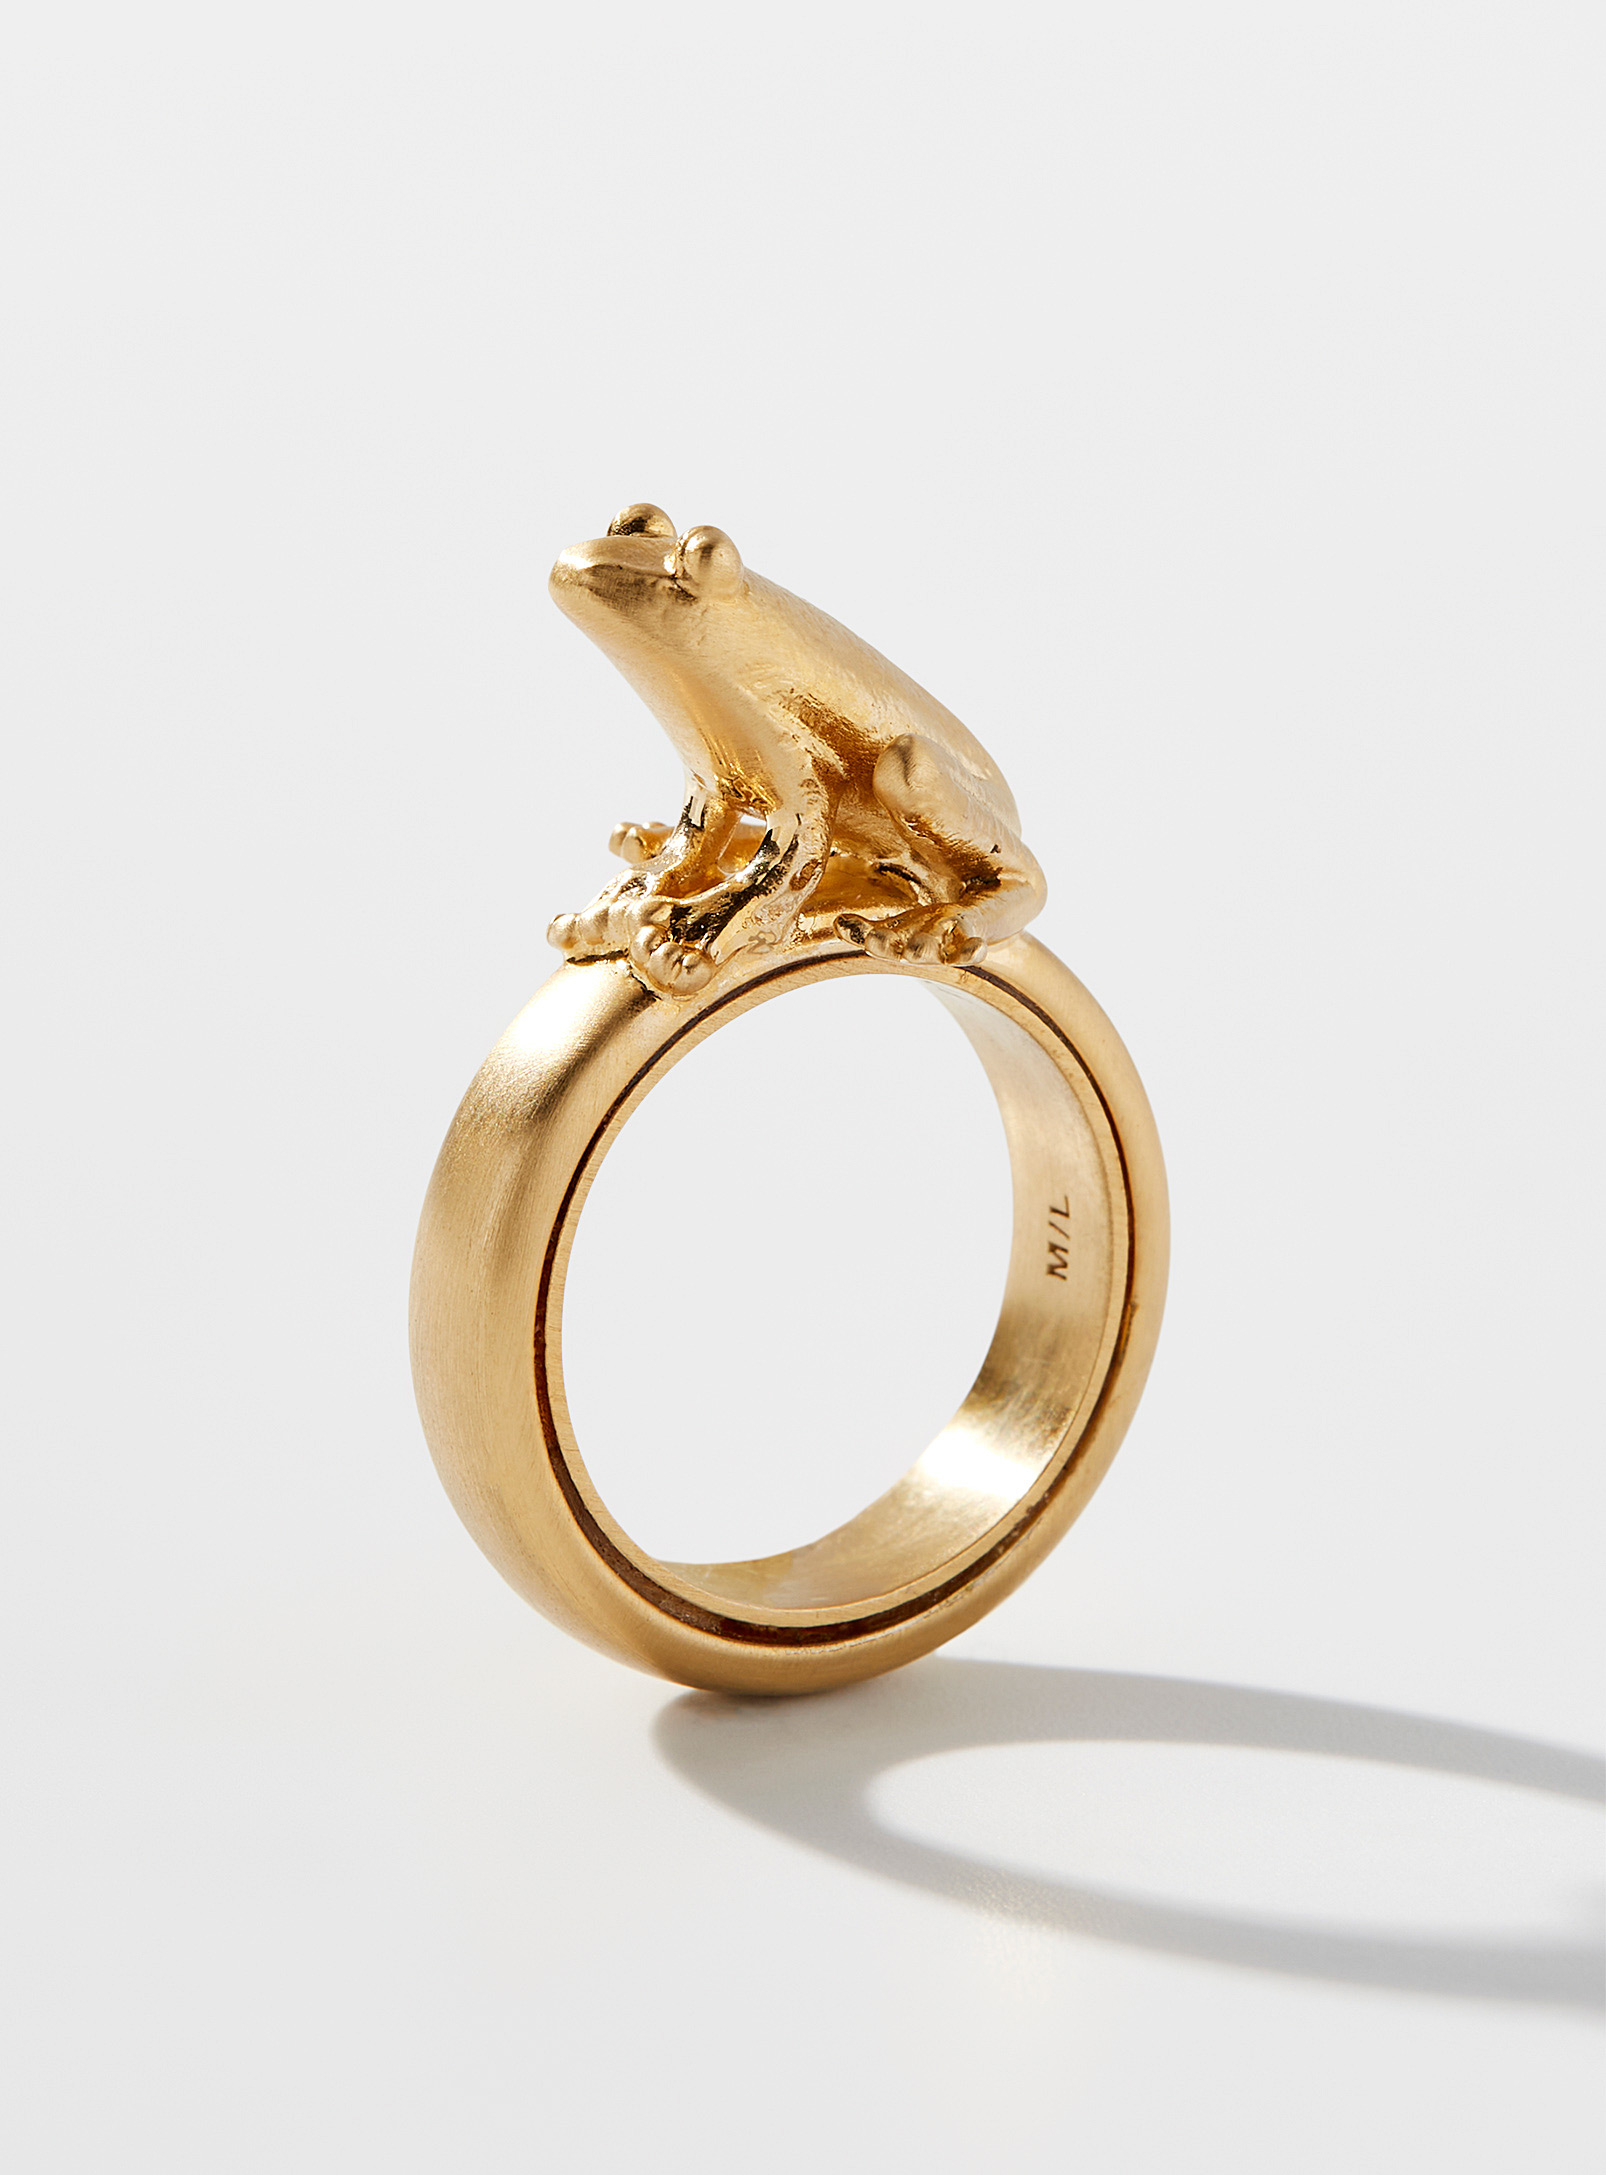 JW Anderson - Men's  small frog ring